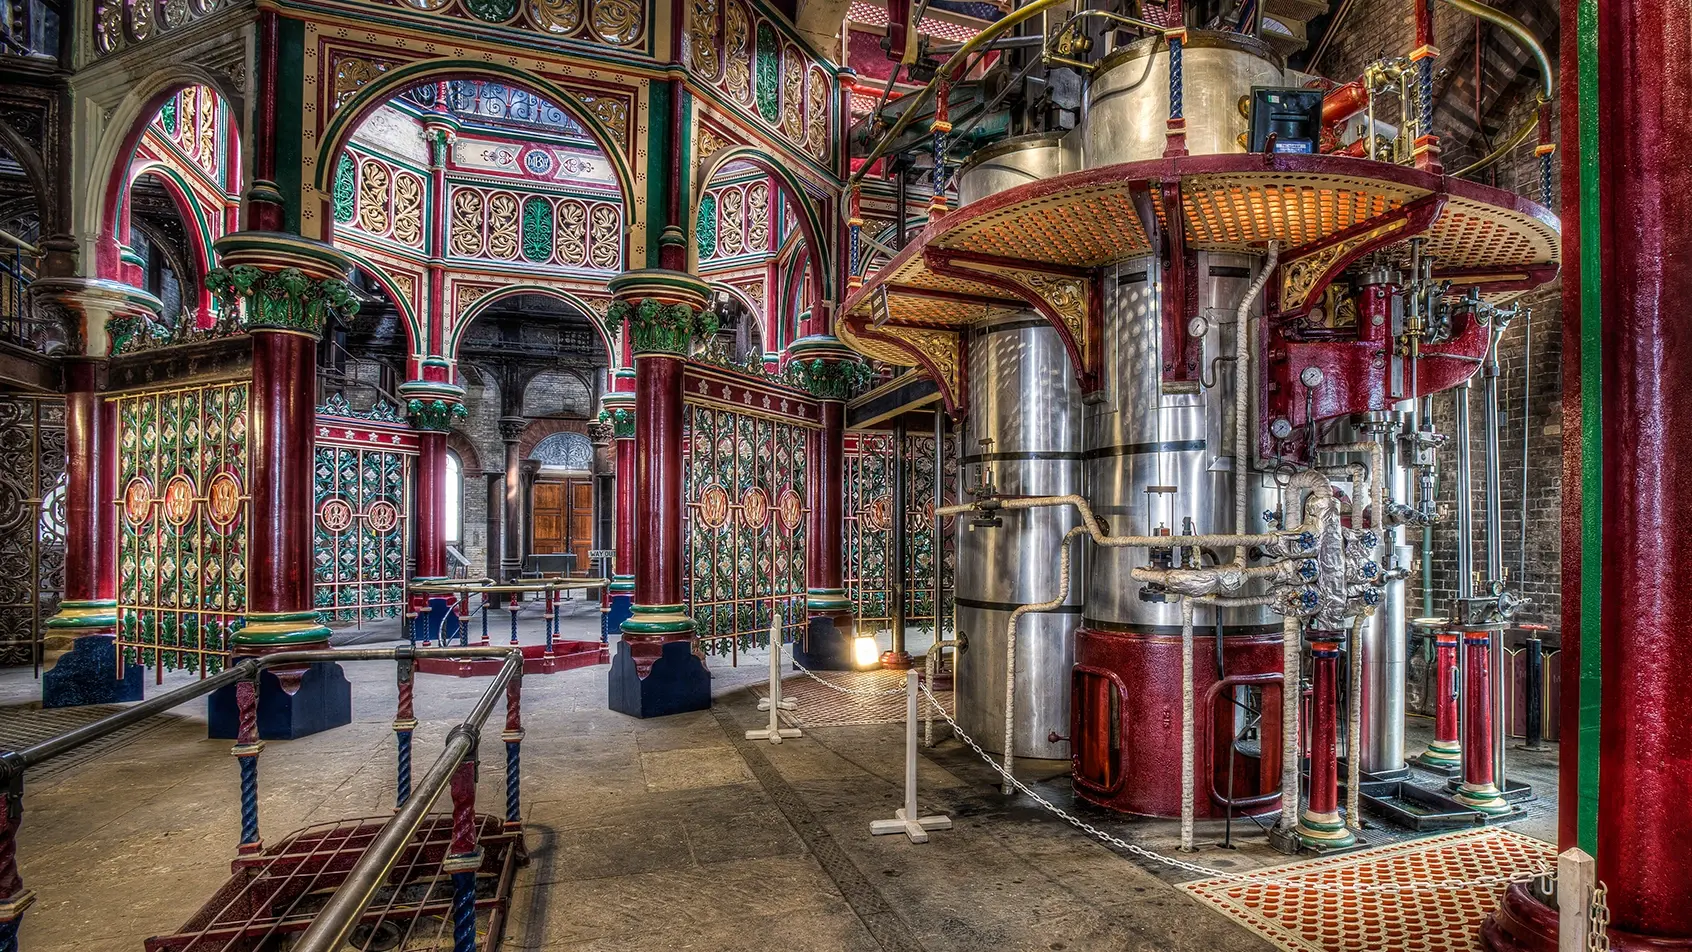 The Crossness Sewage Pumping Station is an amazing part of London's history. Built in 1865, it's like a time machine to the past. Inside, there's a fancy engine house that's been fixed up by volunteers. It's a unique place to visit and learn about British industrial heritage